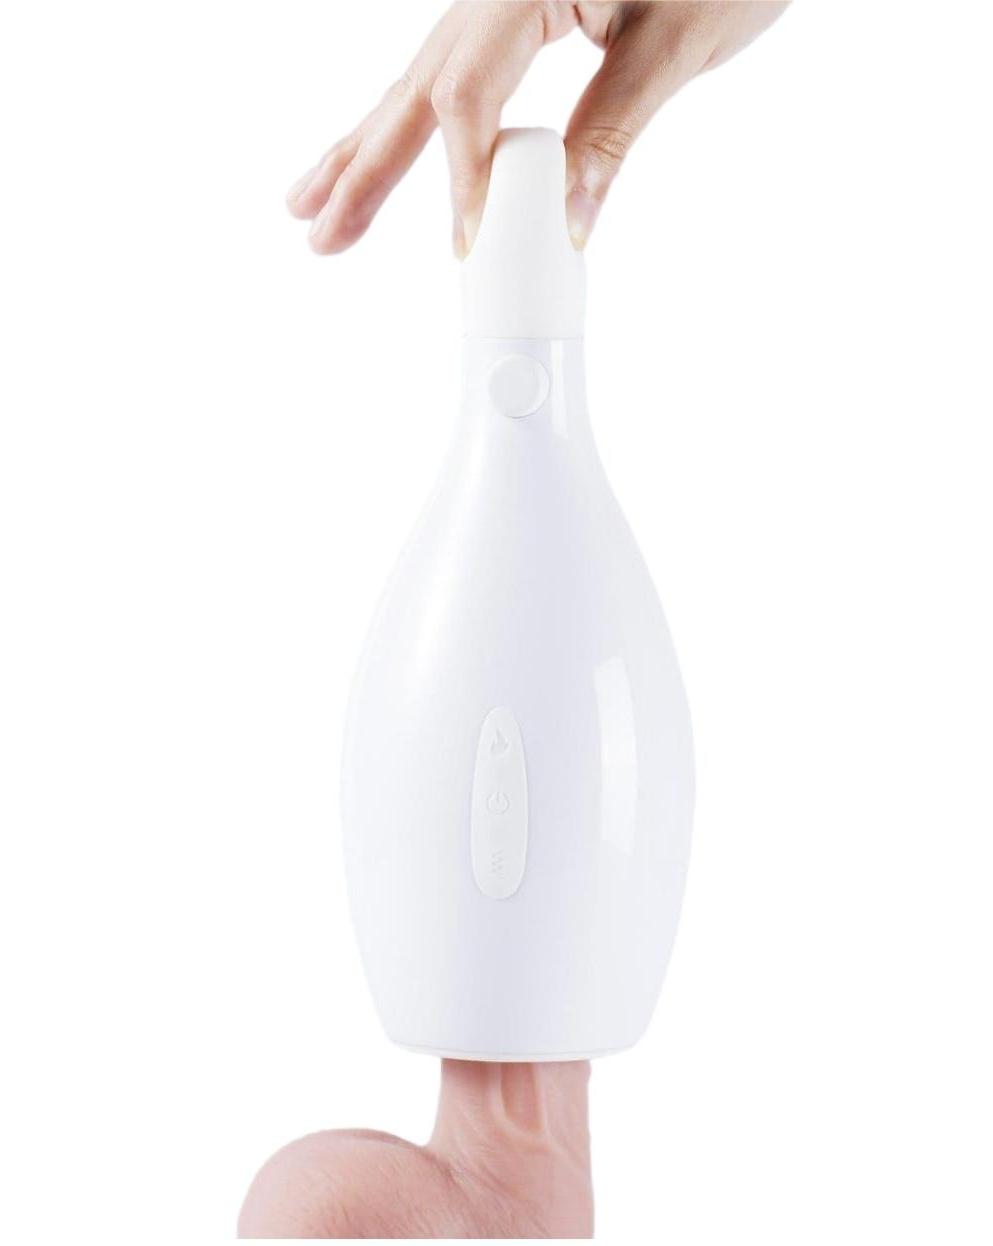 Lonnie Automatic Vibrating Masturbation Cup with Pump - Experience the Ultimate Sensual Pleasure-BestGSpot